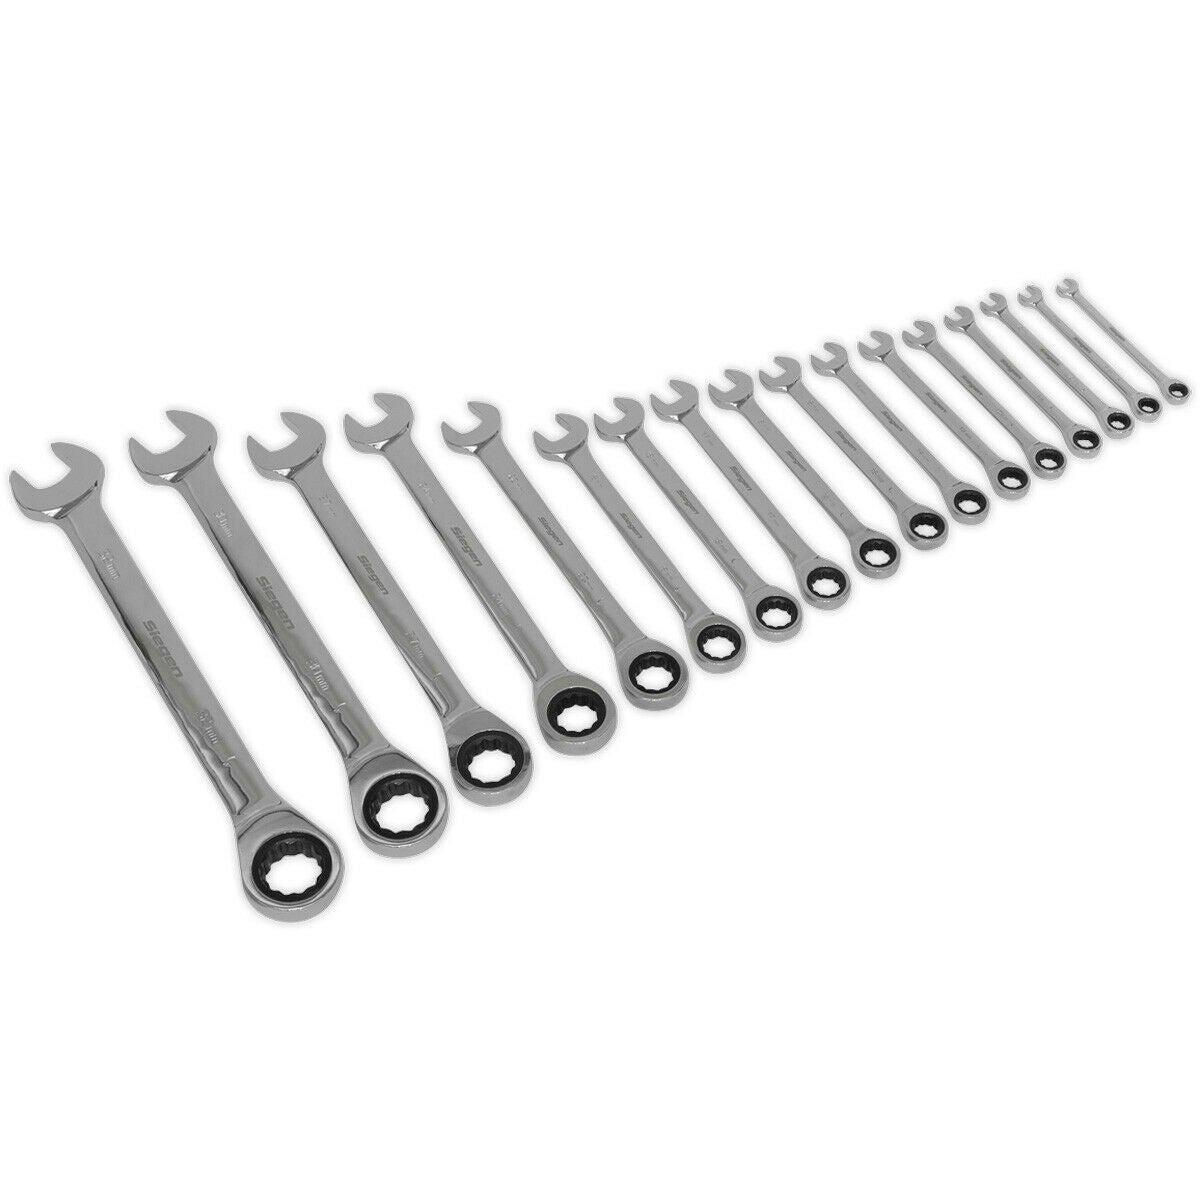 17pc Ratchet Combination Spanner Set - 12 Point Metric Ring Open Head Wrench